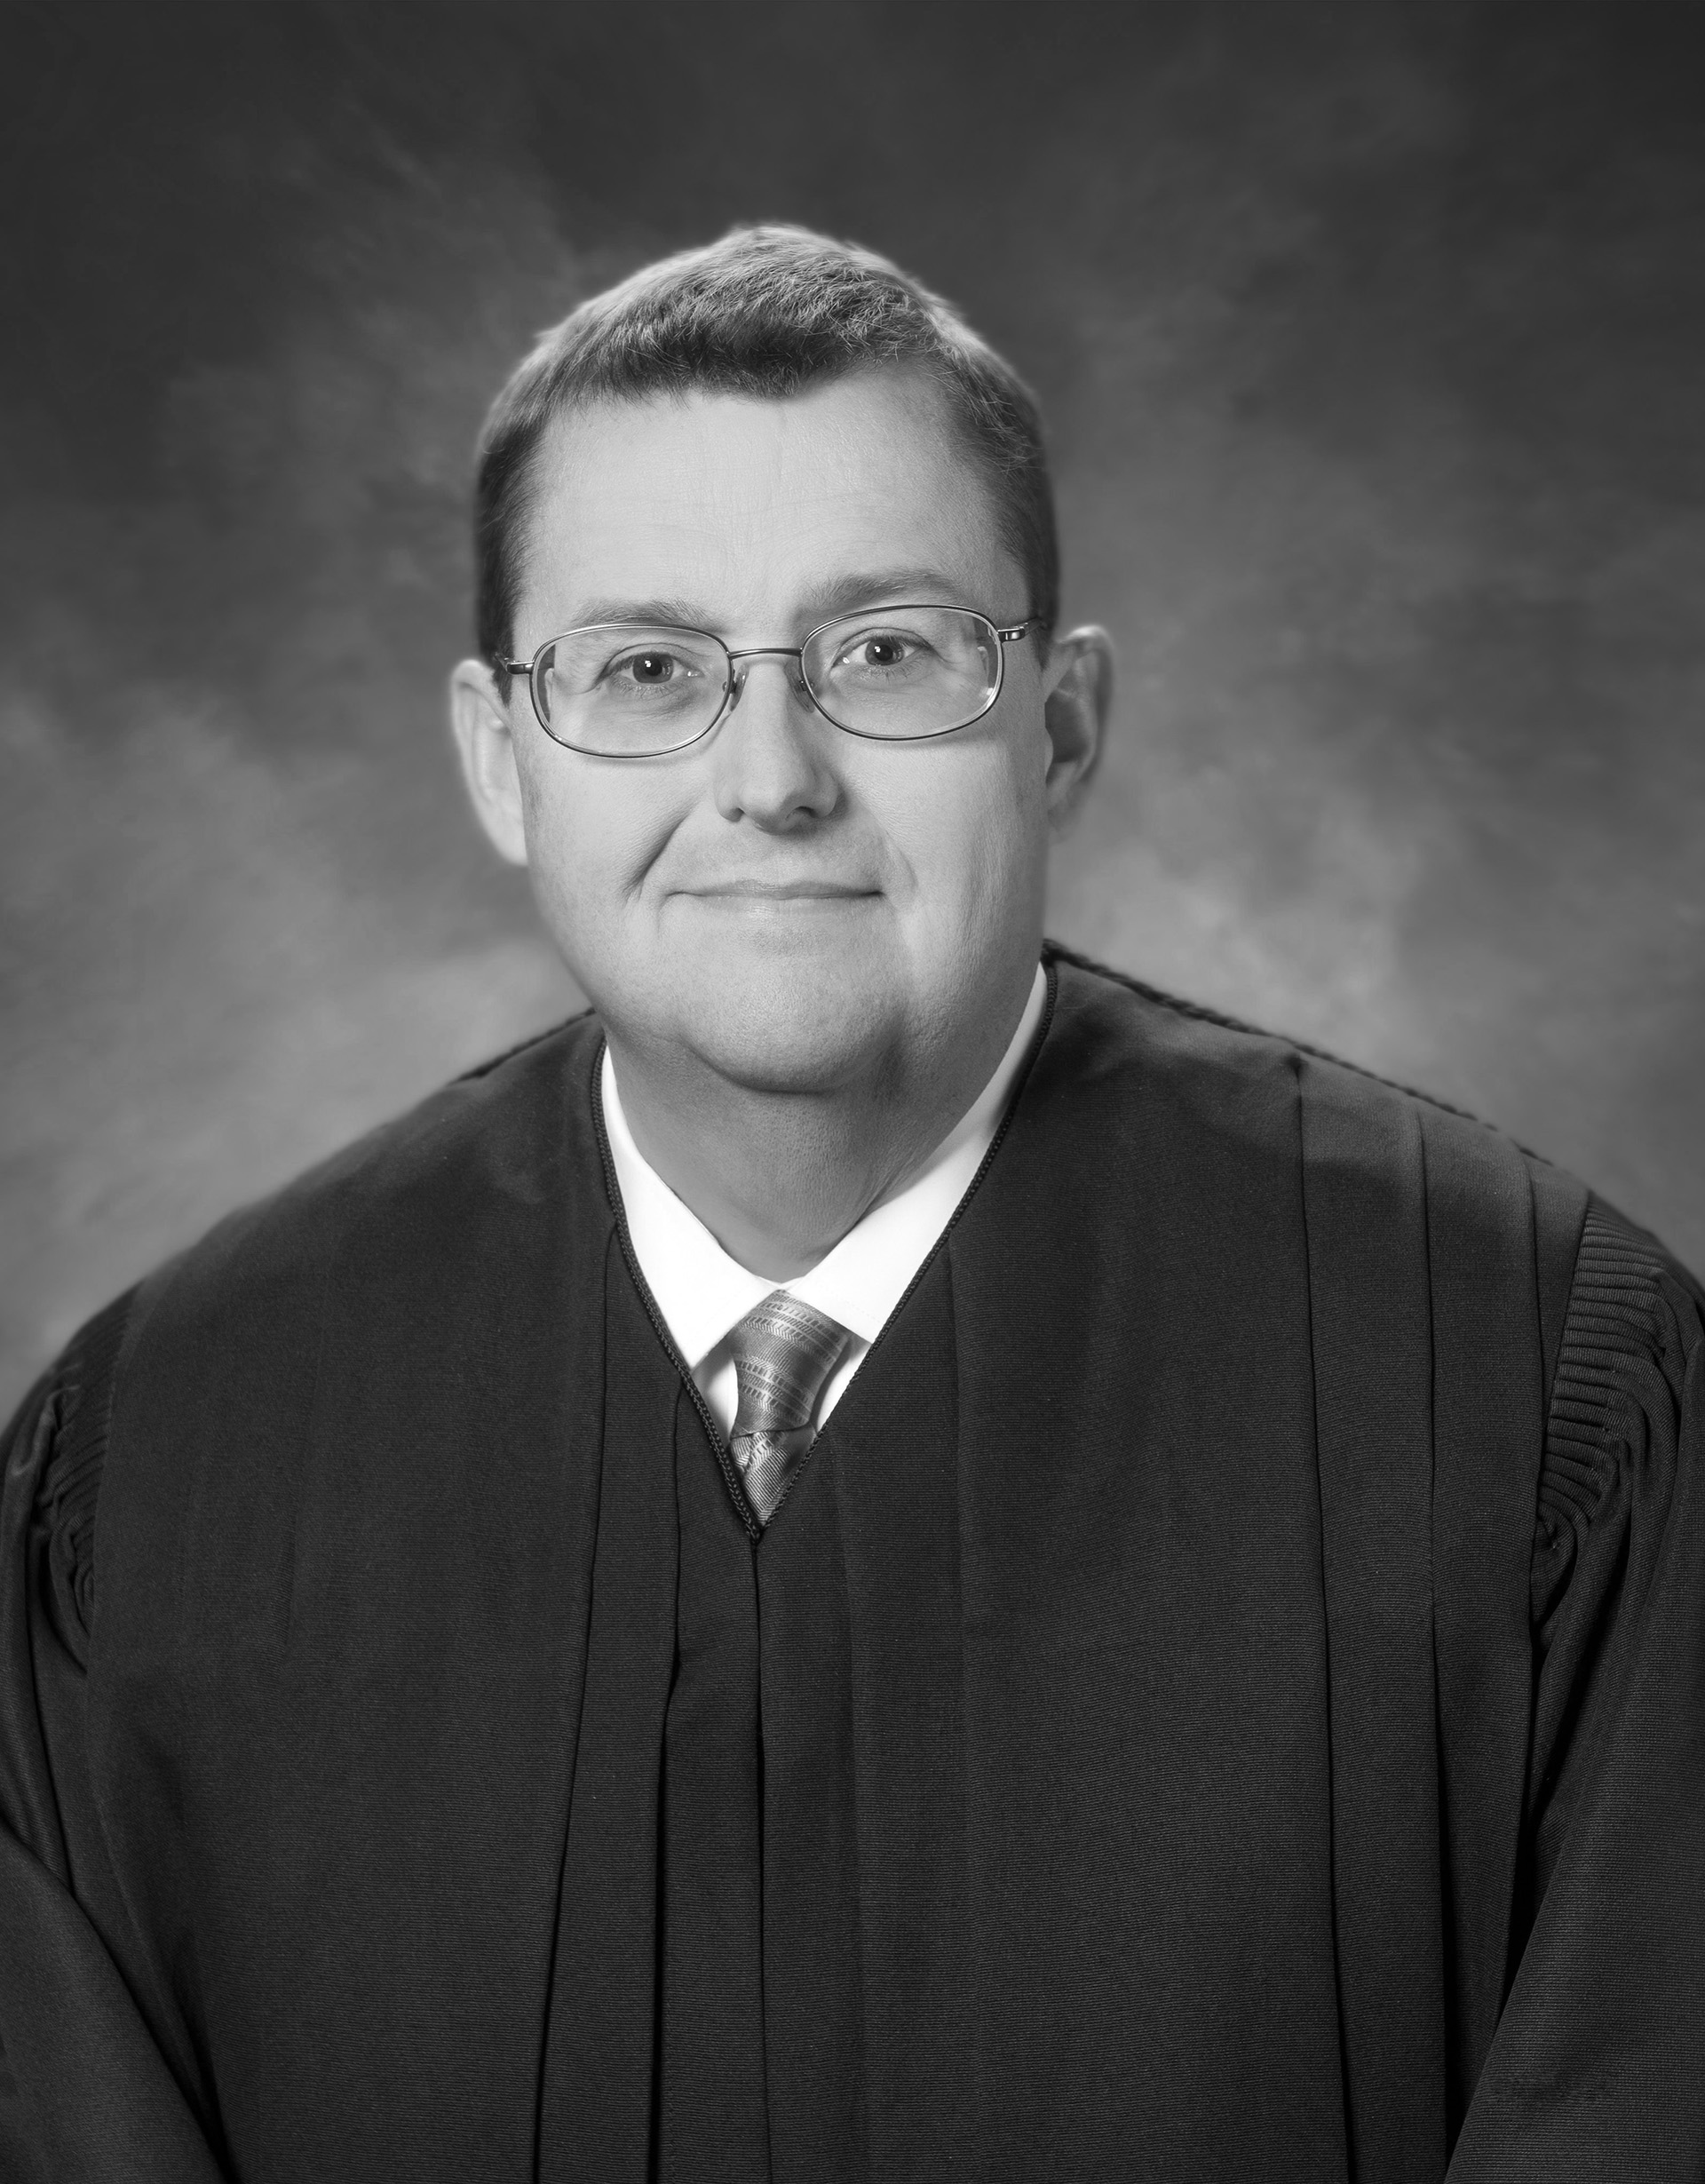 Photo of Chief Justice John M. Bailey